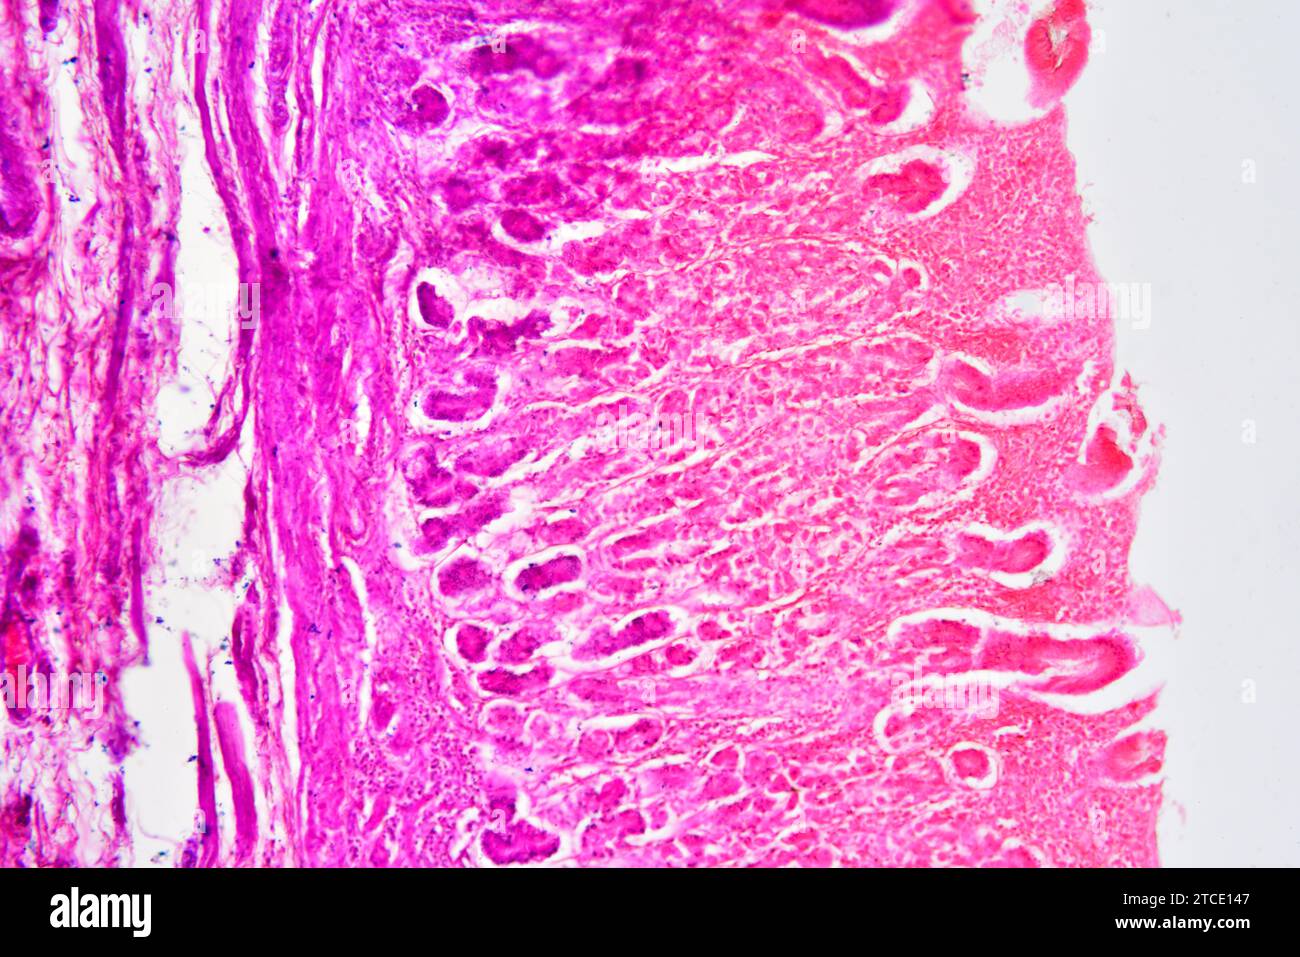 Stomach cross section showing mucosa, submucosa, muscular layer and gastric glands. Optical microscope X100. Stock Photo